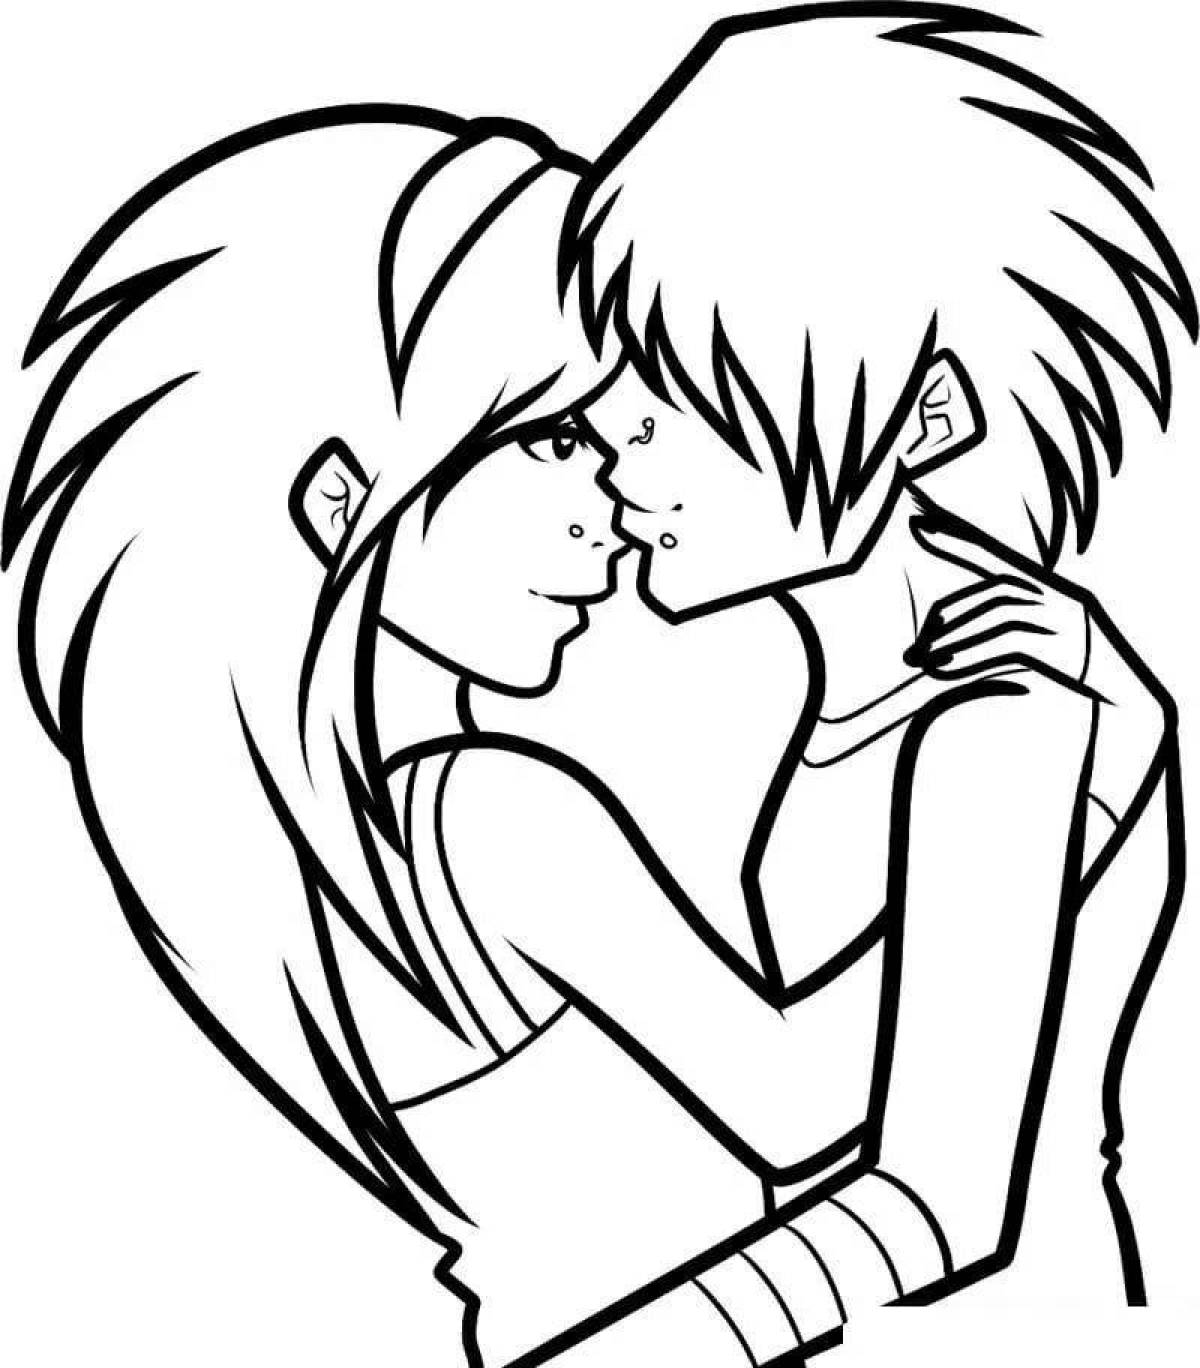 Charming kiss coloring page